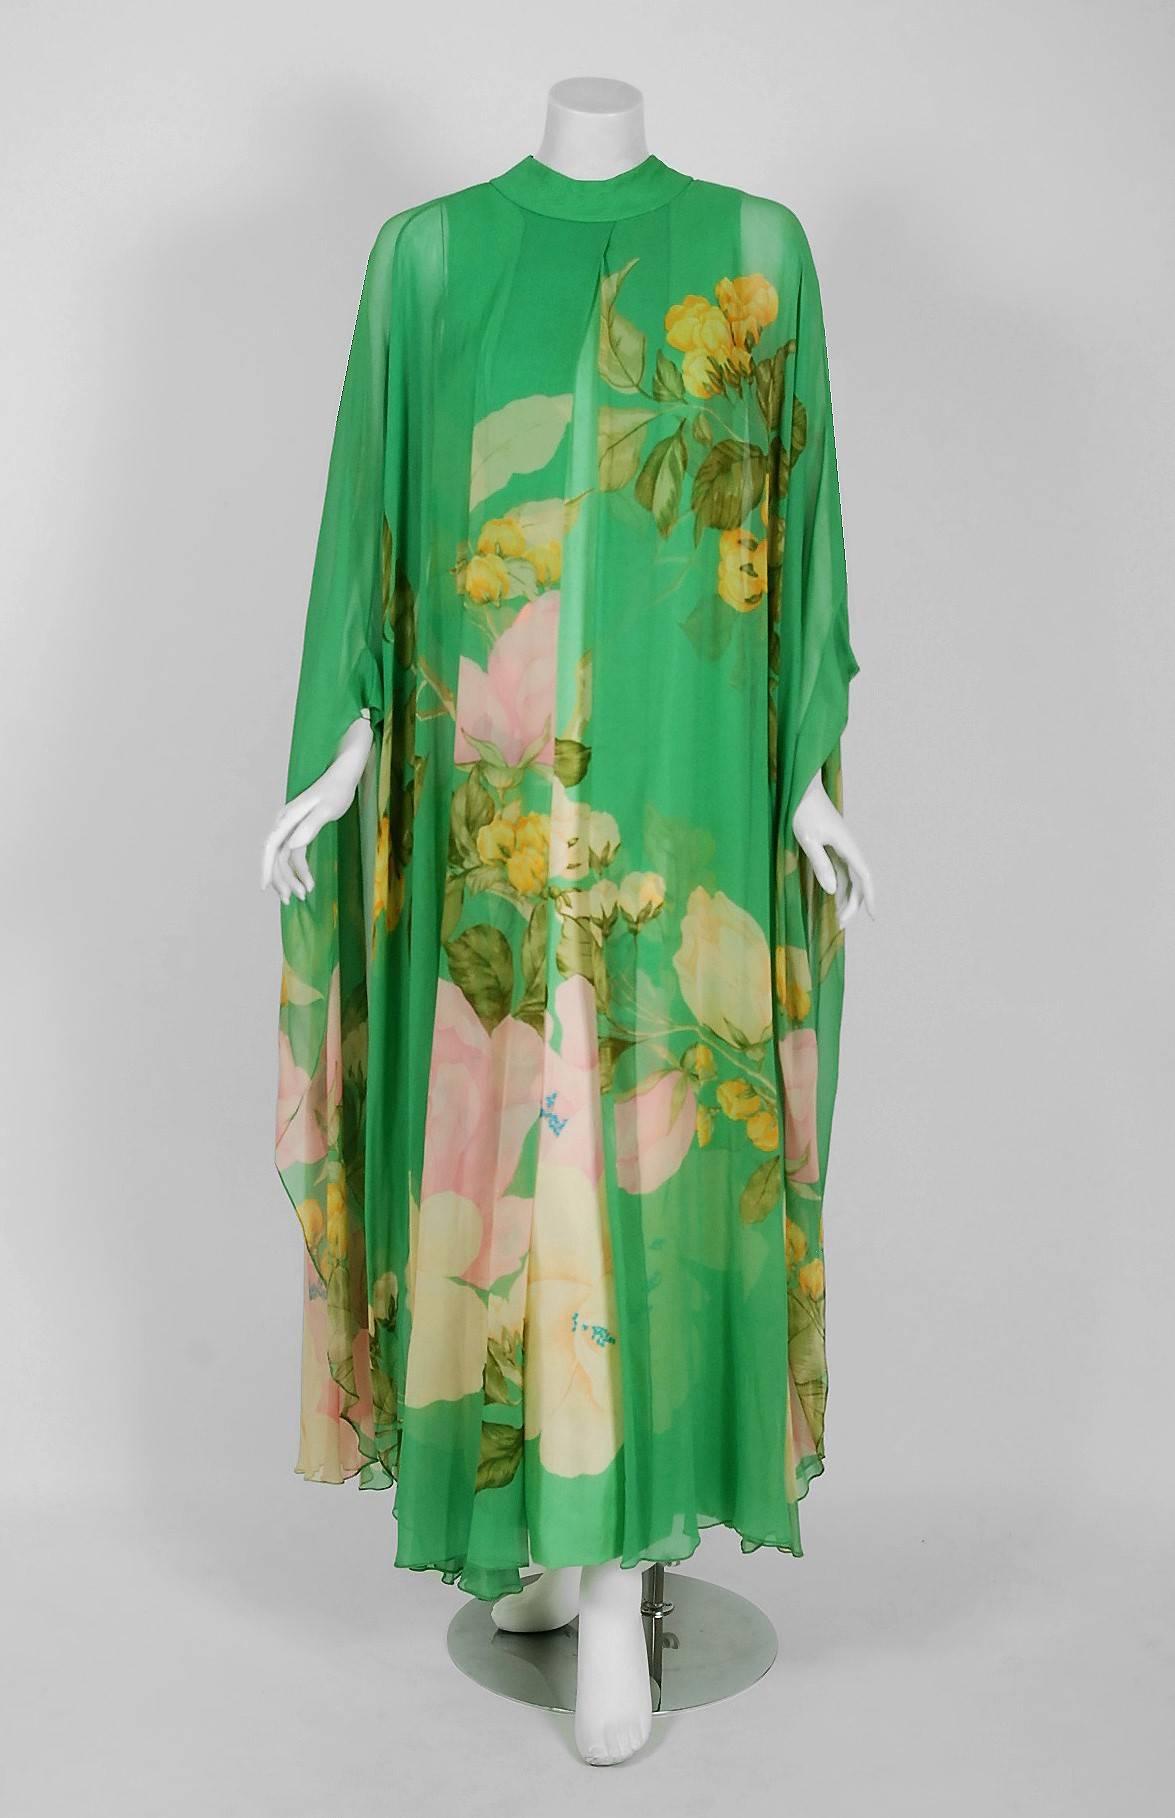 Gorgeous 1970's museum-quality, iconic and instantly recognizable caftan gown by Hanae Mori. Whilst on a Paris holiday in 1960, Mori had a fateful fitting with Coco Chanel. She claimed this meeting changed her life and she challenged herself to